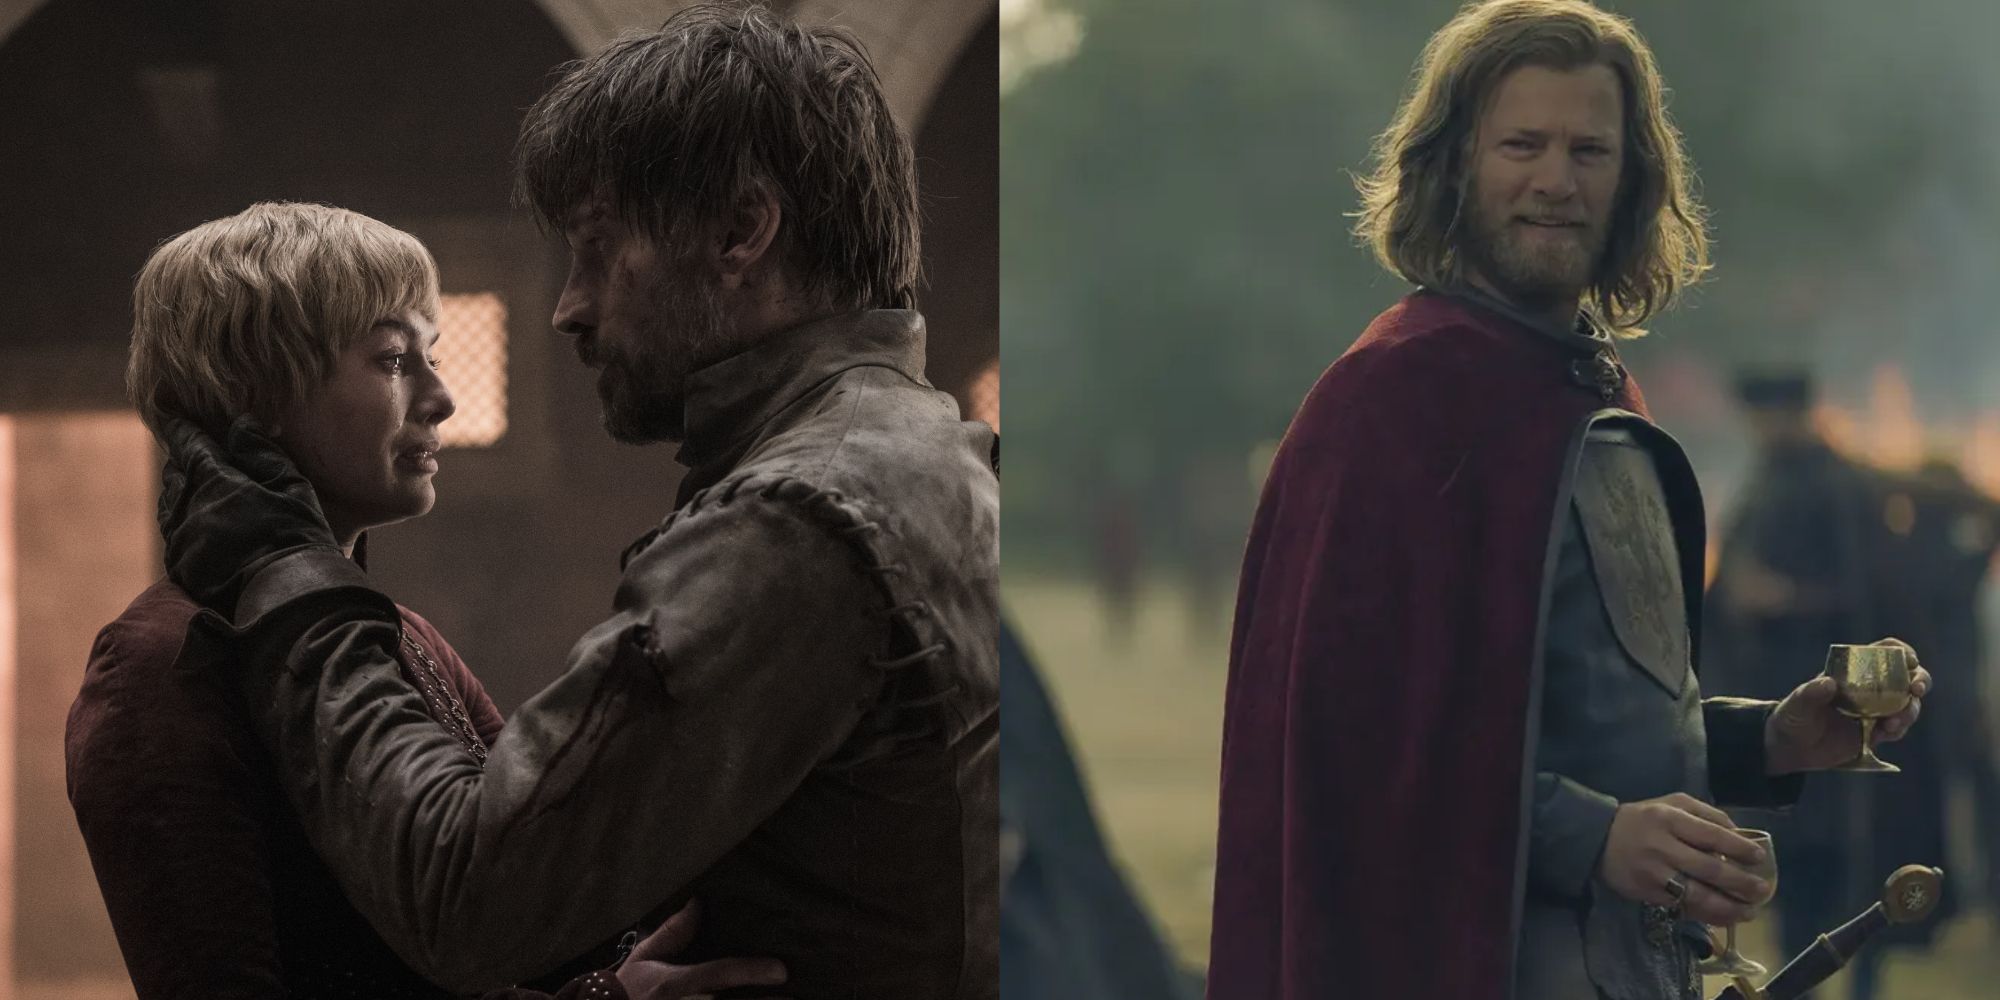 Recreation Of Thrones: The Lannisters, Ranked Least To Maximum Evil